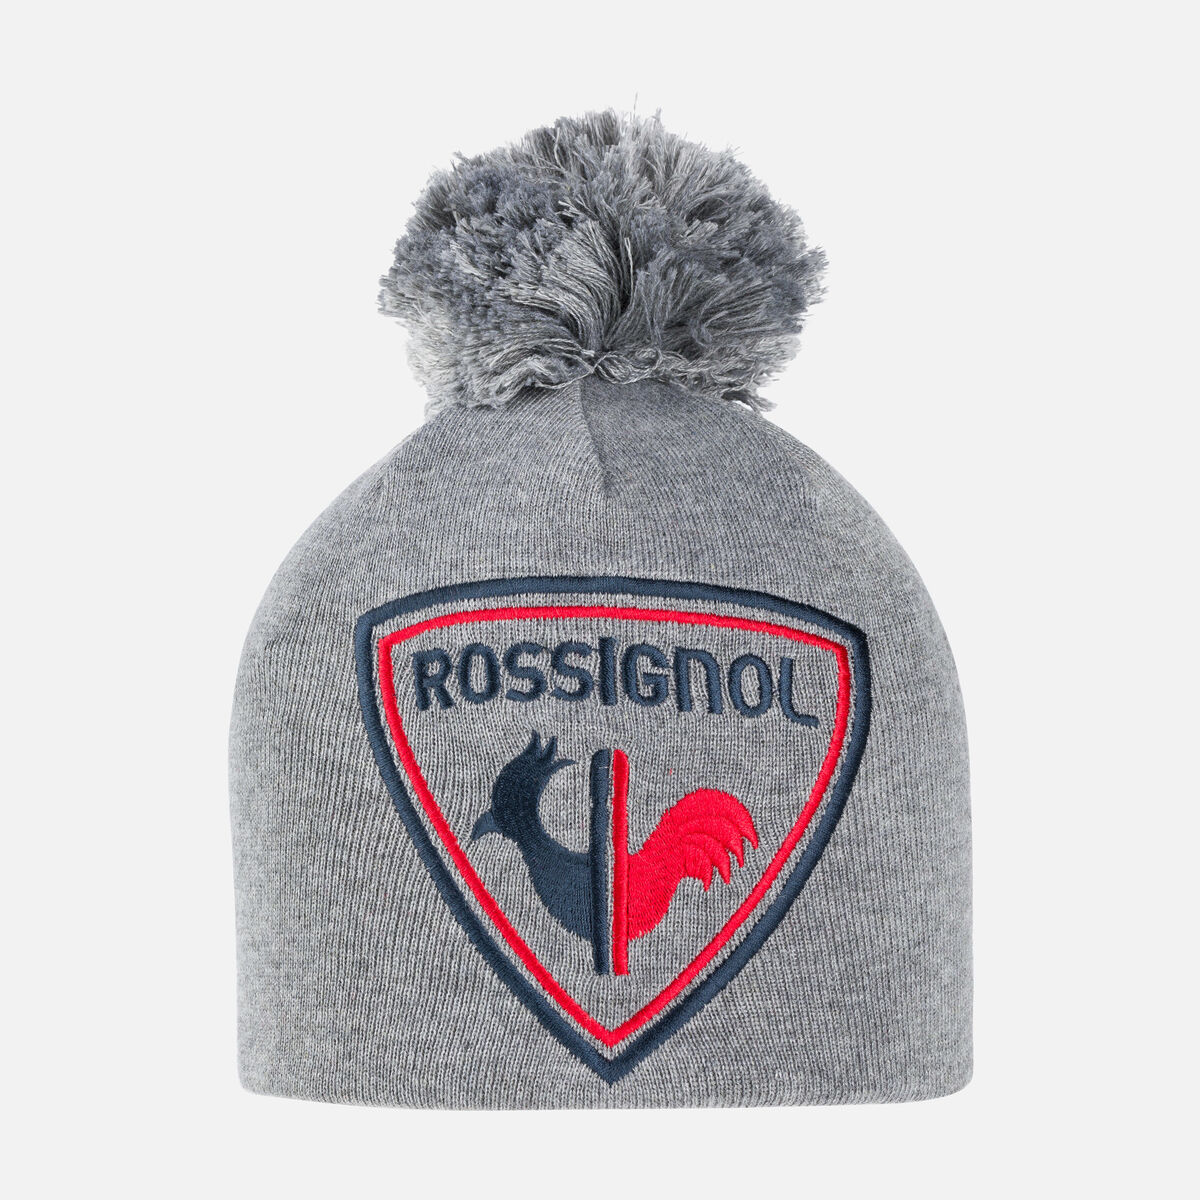 Men's Rooster Beanie